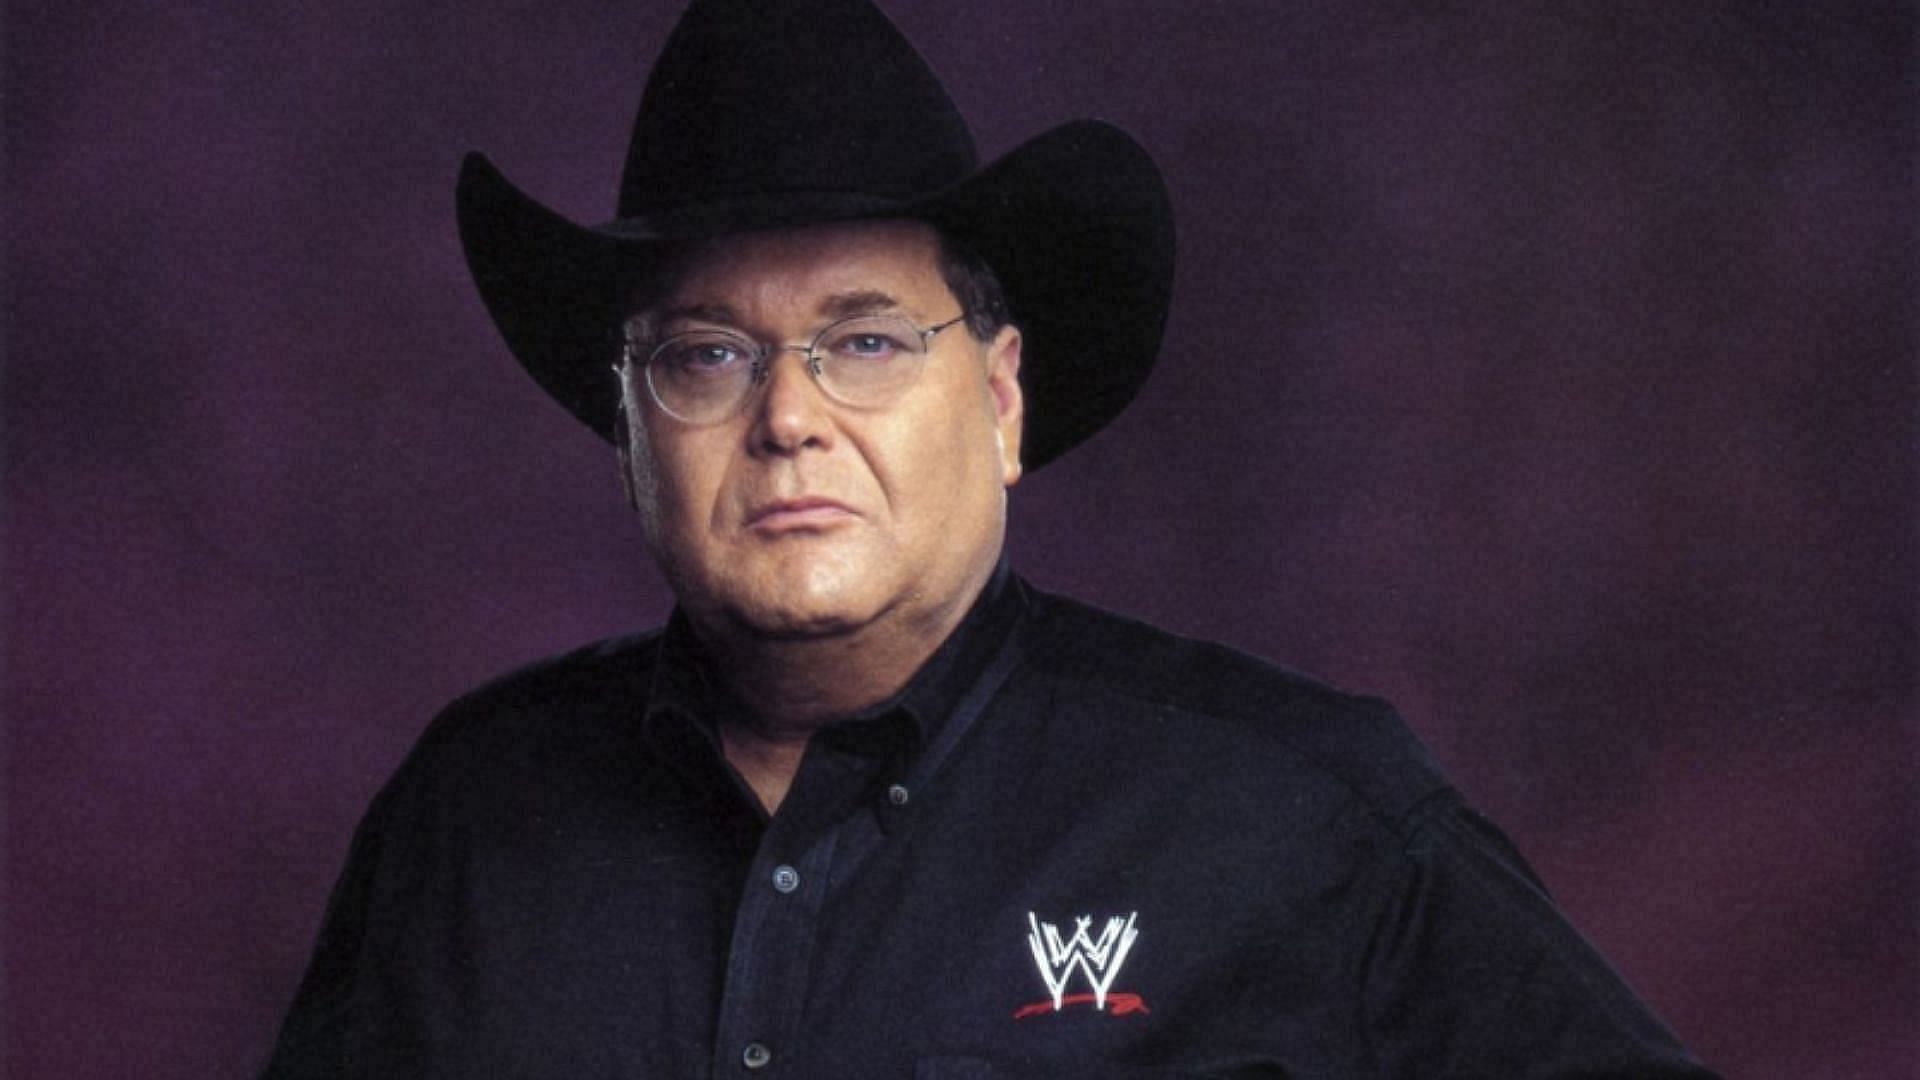 Jim Ross became a WWE Hall of Famer in 2007